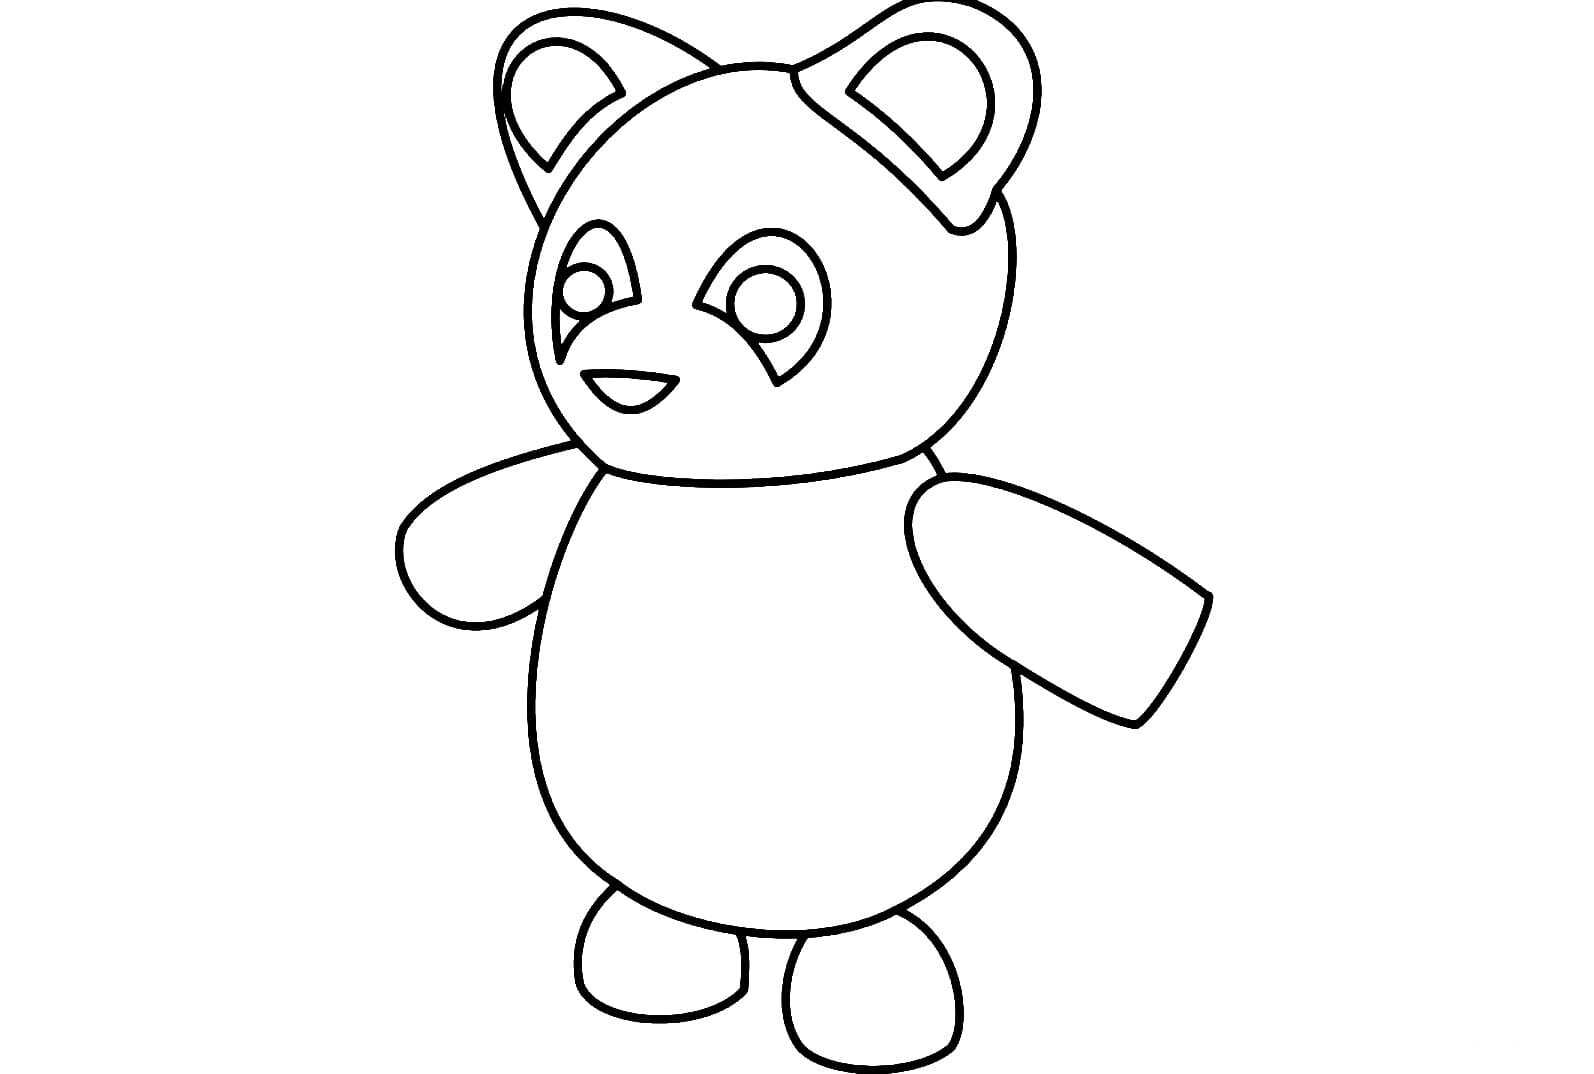 Panda from Adopt me follows the same structure as Panda bear Coloring Page